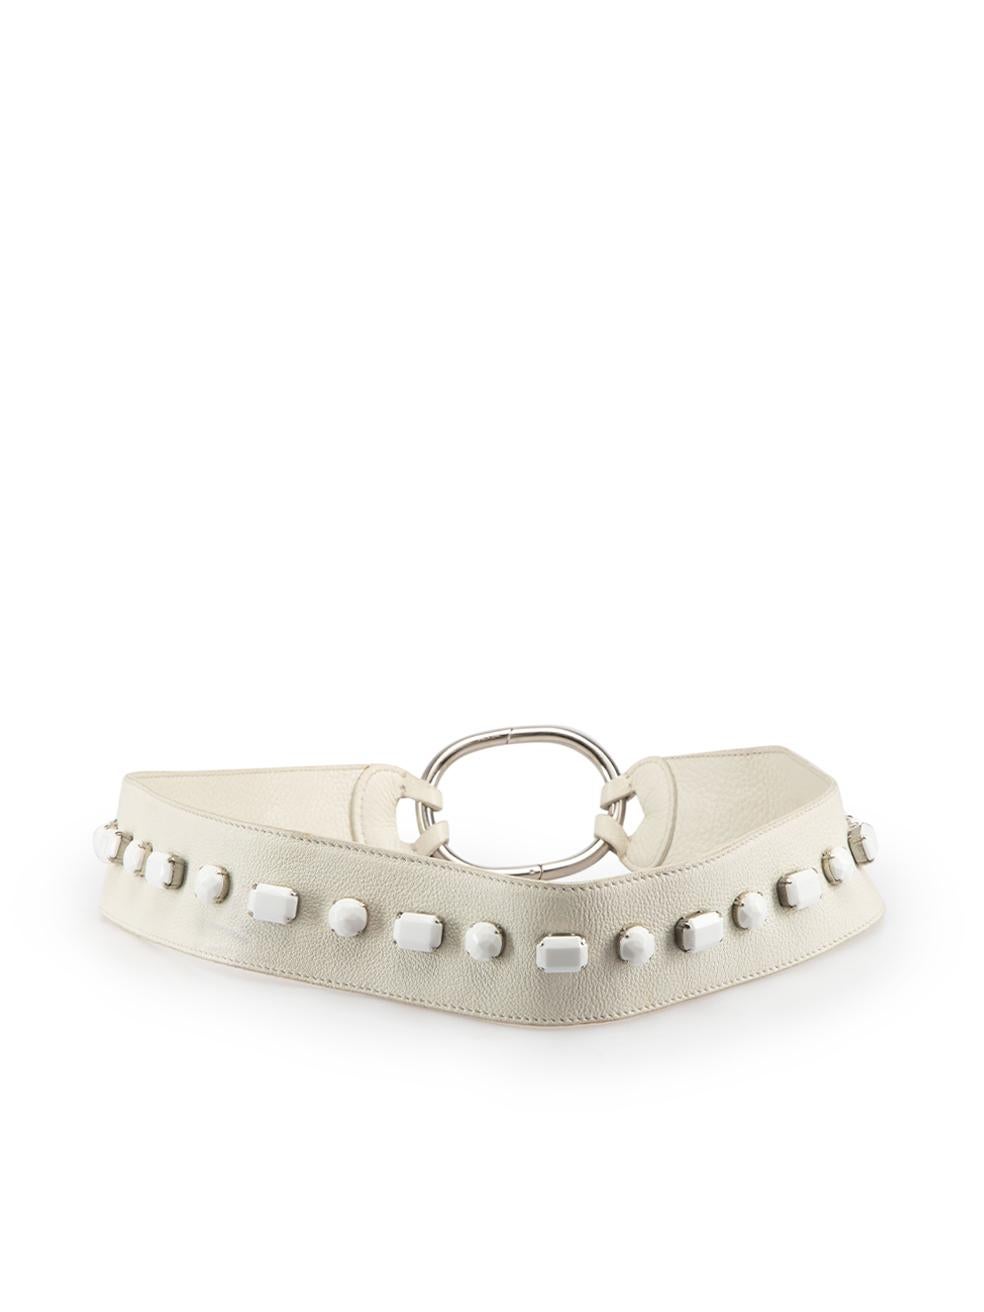 Prada Vintage White Crystal Accent Belt In Good Condition For Sale In London, GB